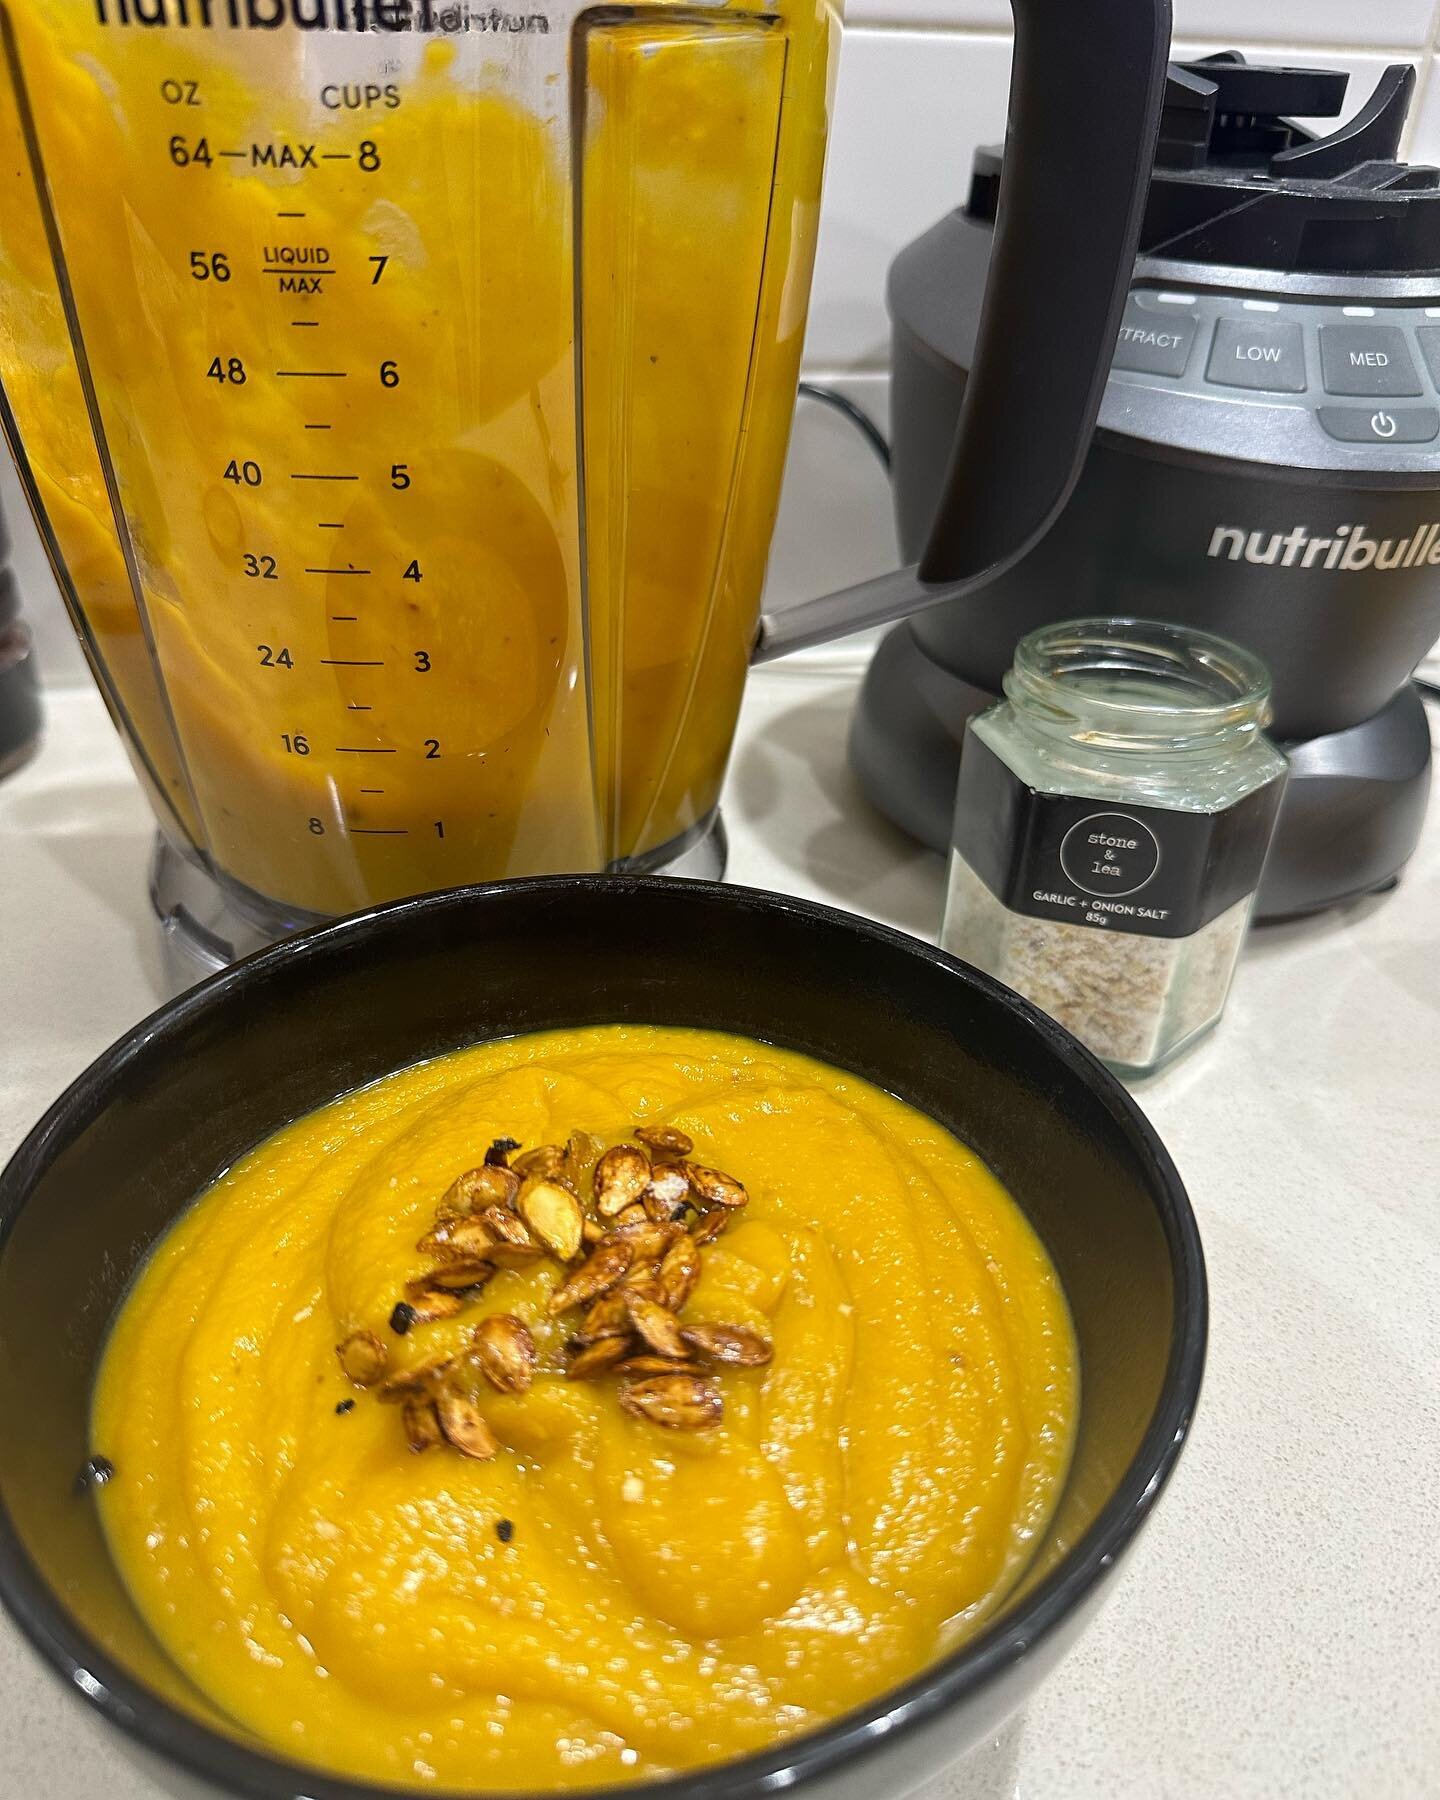 Rainy cool nights are calling for Pumpkin soup 👌🏼

SHOP: http://bit.ly/StoneandLea-GarlicOnionSalt